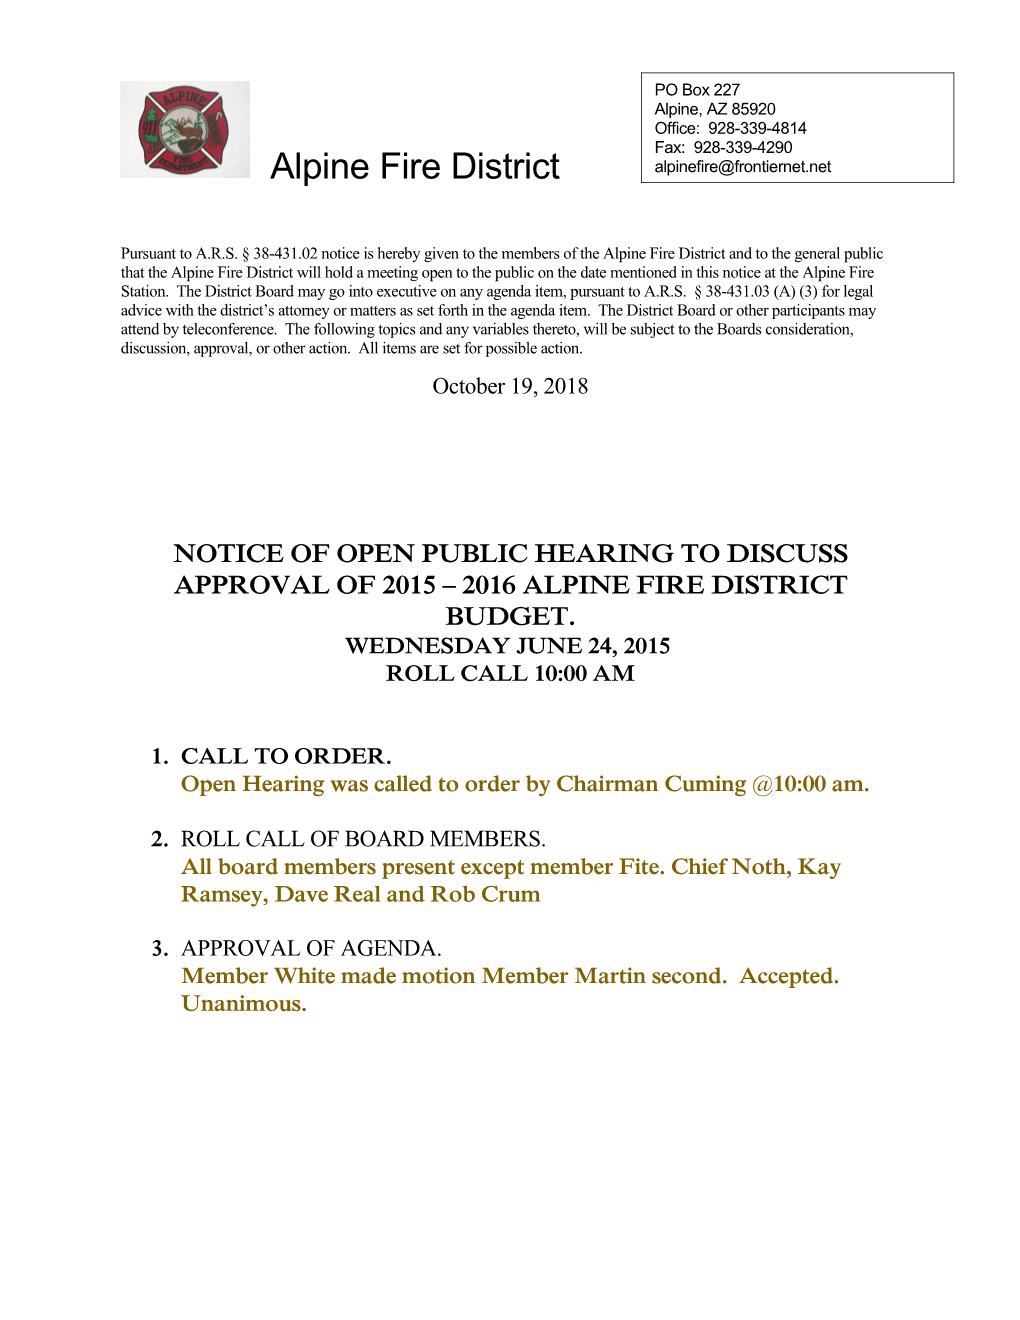 Notice of Open Public Hearing to Discuss Approval of 2015 2016 Alpine Fire District Budget